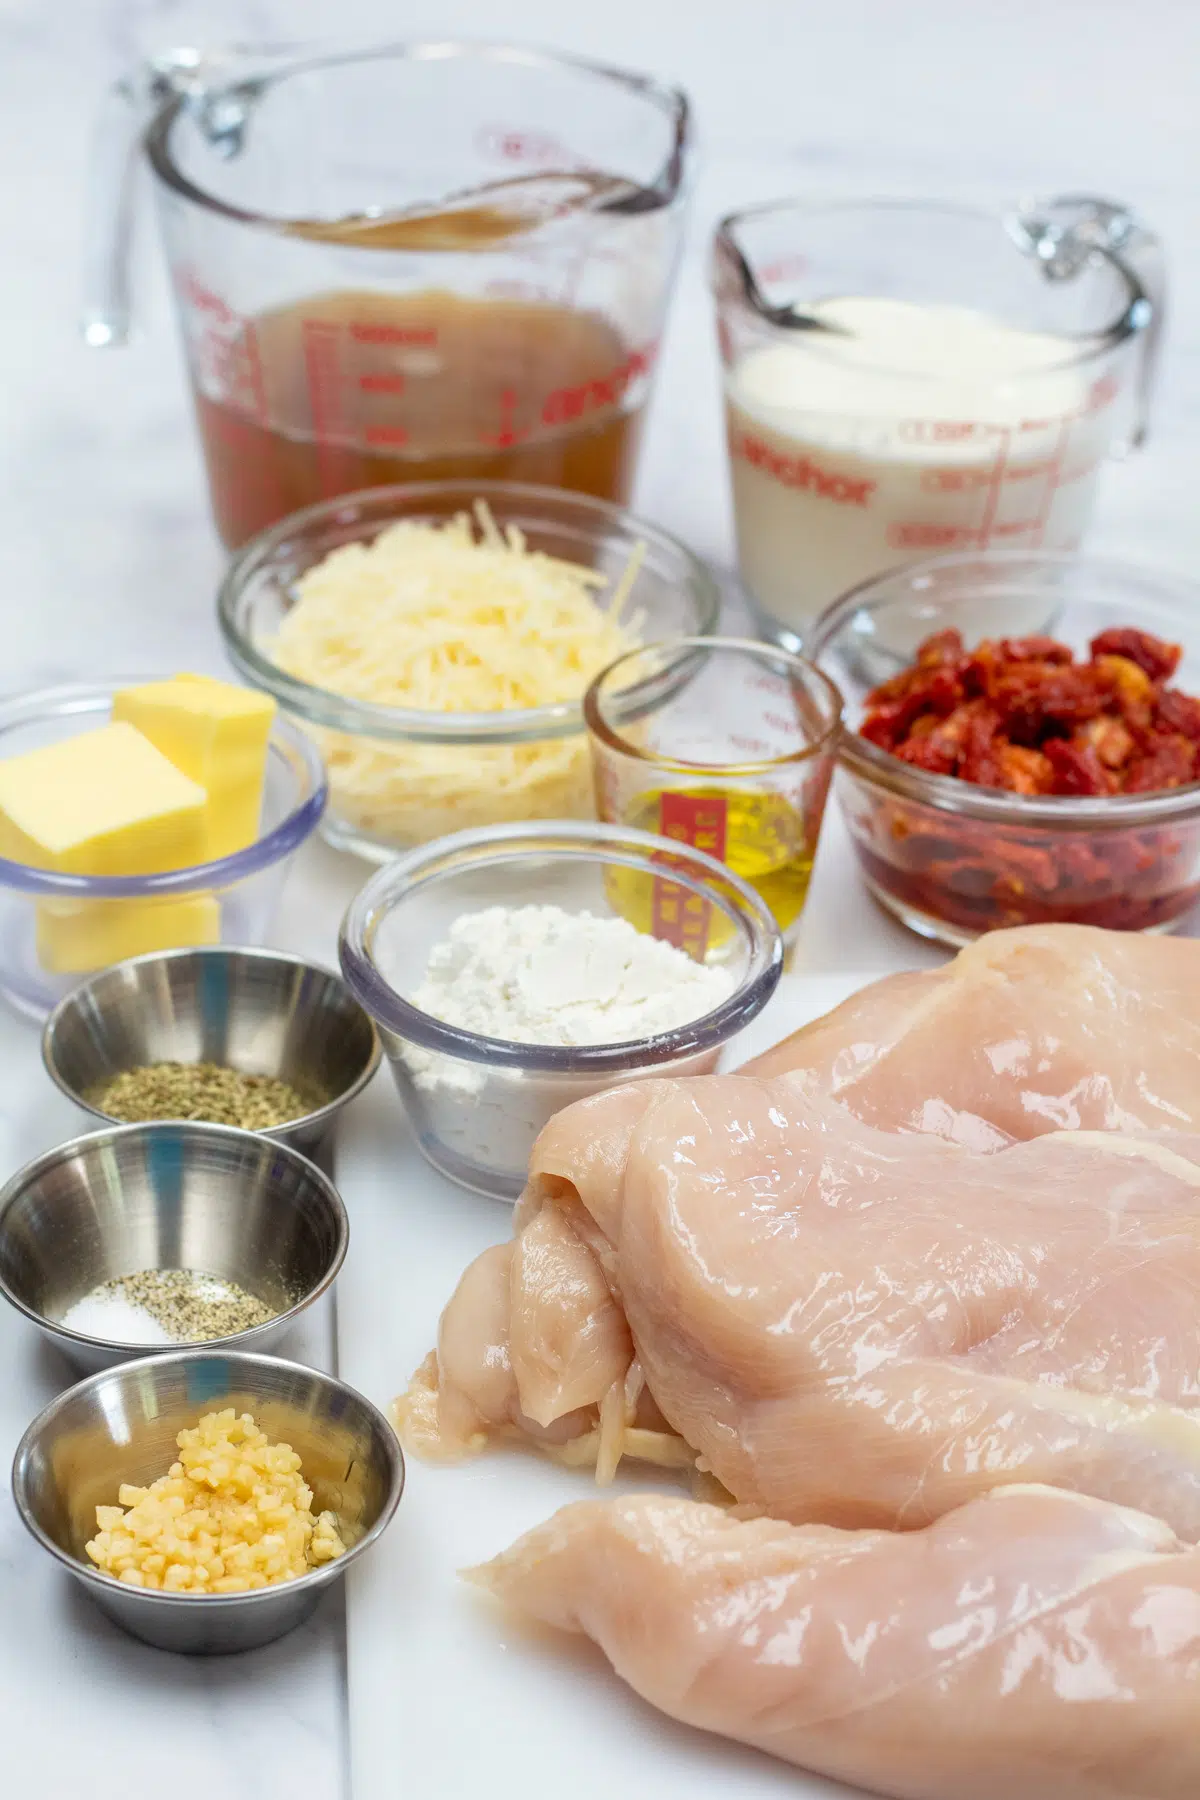 Tall image showing ingredients needed to make marry me chicken.